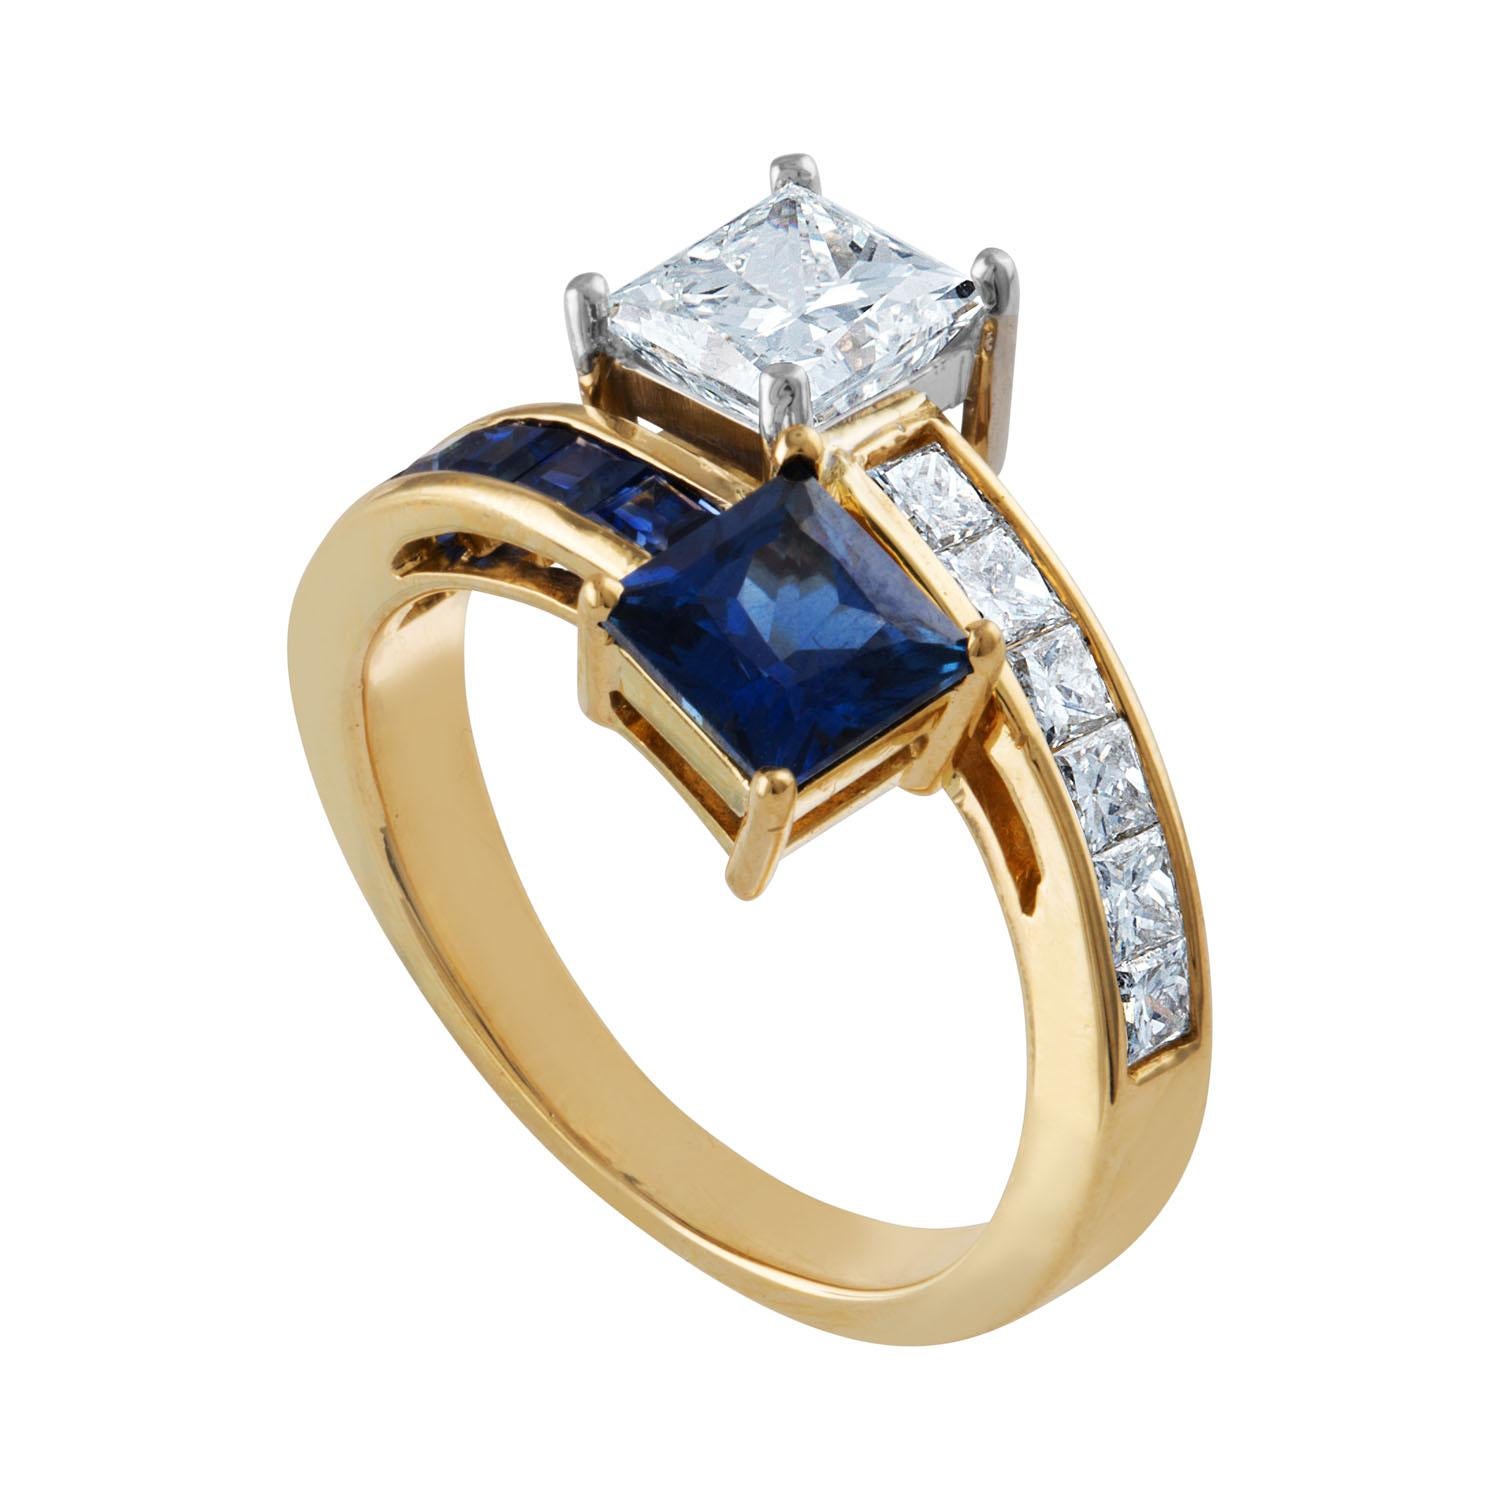 Stunningly Classic Bypass Ring
The ring is 14K Yellow And White Gold
The Princess Cut Diamond is GIA Certified 1.06 Carats G VS2
The Princess Cut Blue Sapphire 1.25 Carats
There are 0.50 Carats G VS In Small Princess Cut Diamonds
There are 0.90